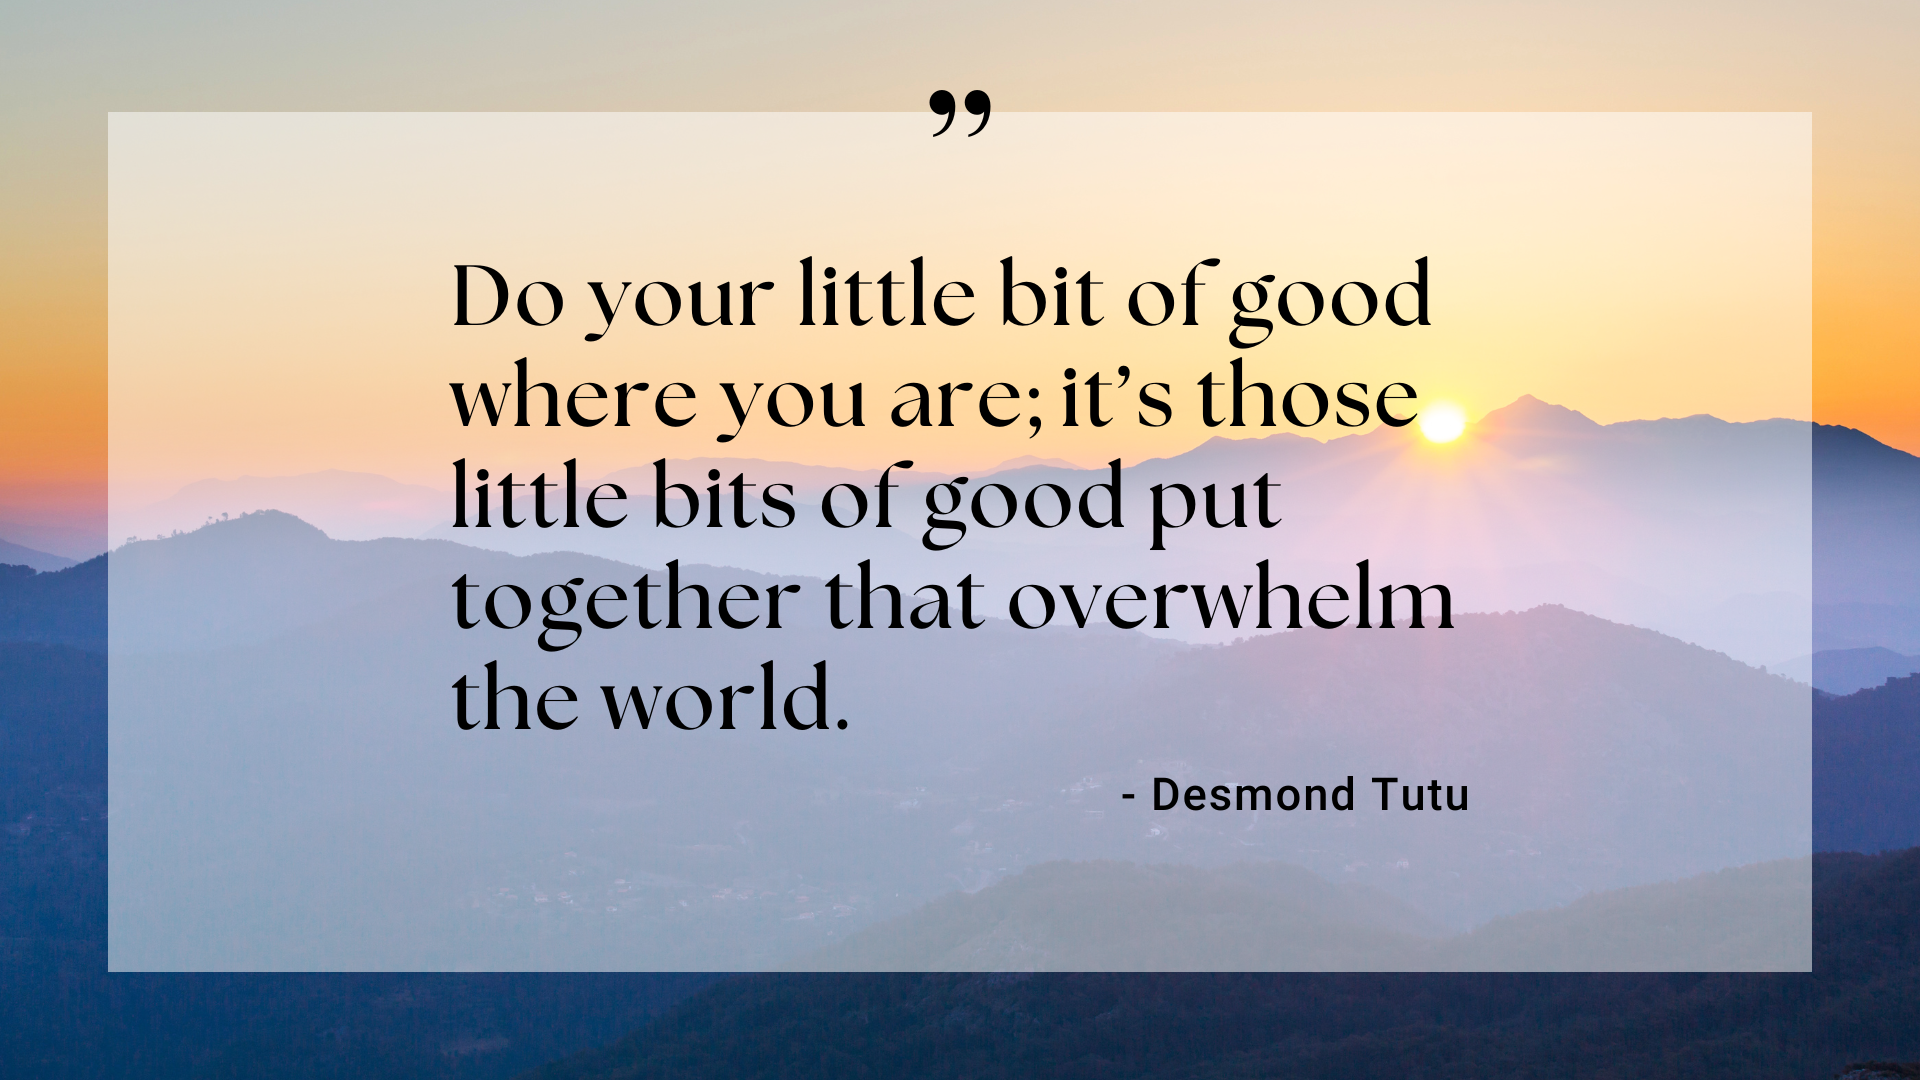 Quote: Do your little bit of good where you are; it's those little bits of good put together that overwhelm the world. By Desmond Tutu